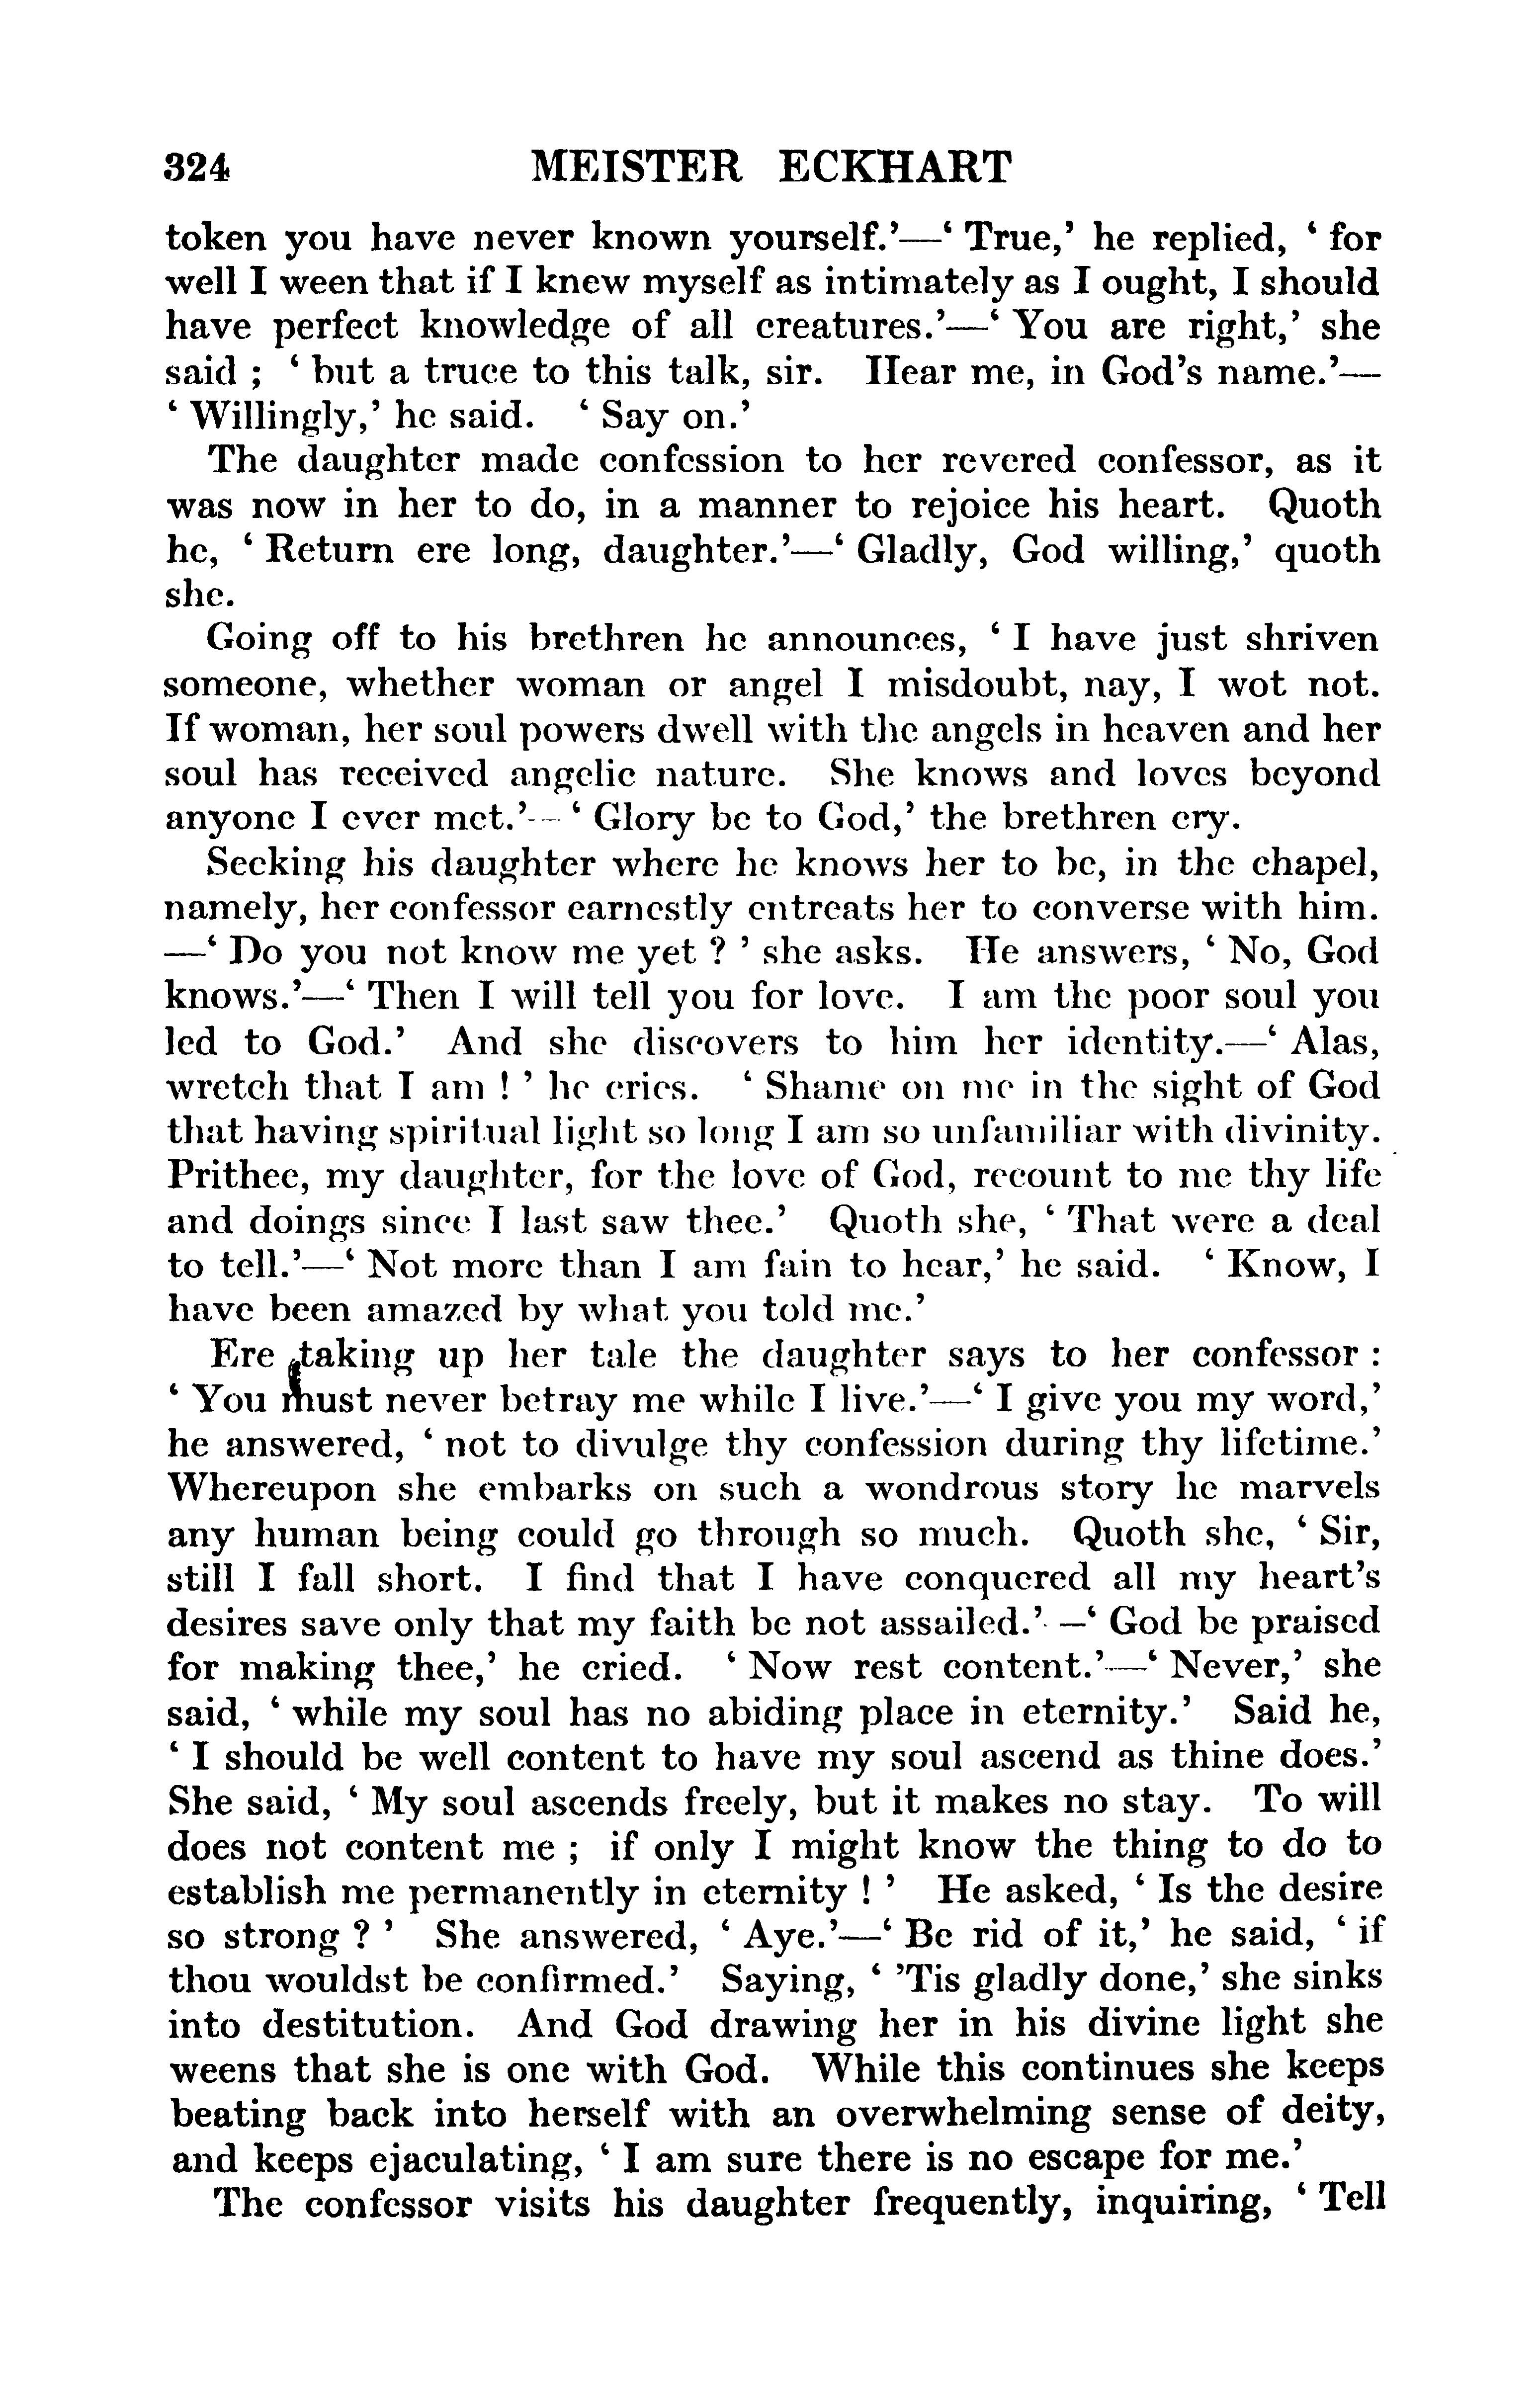 Image of page 0348